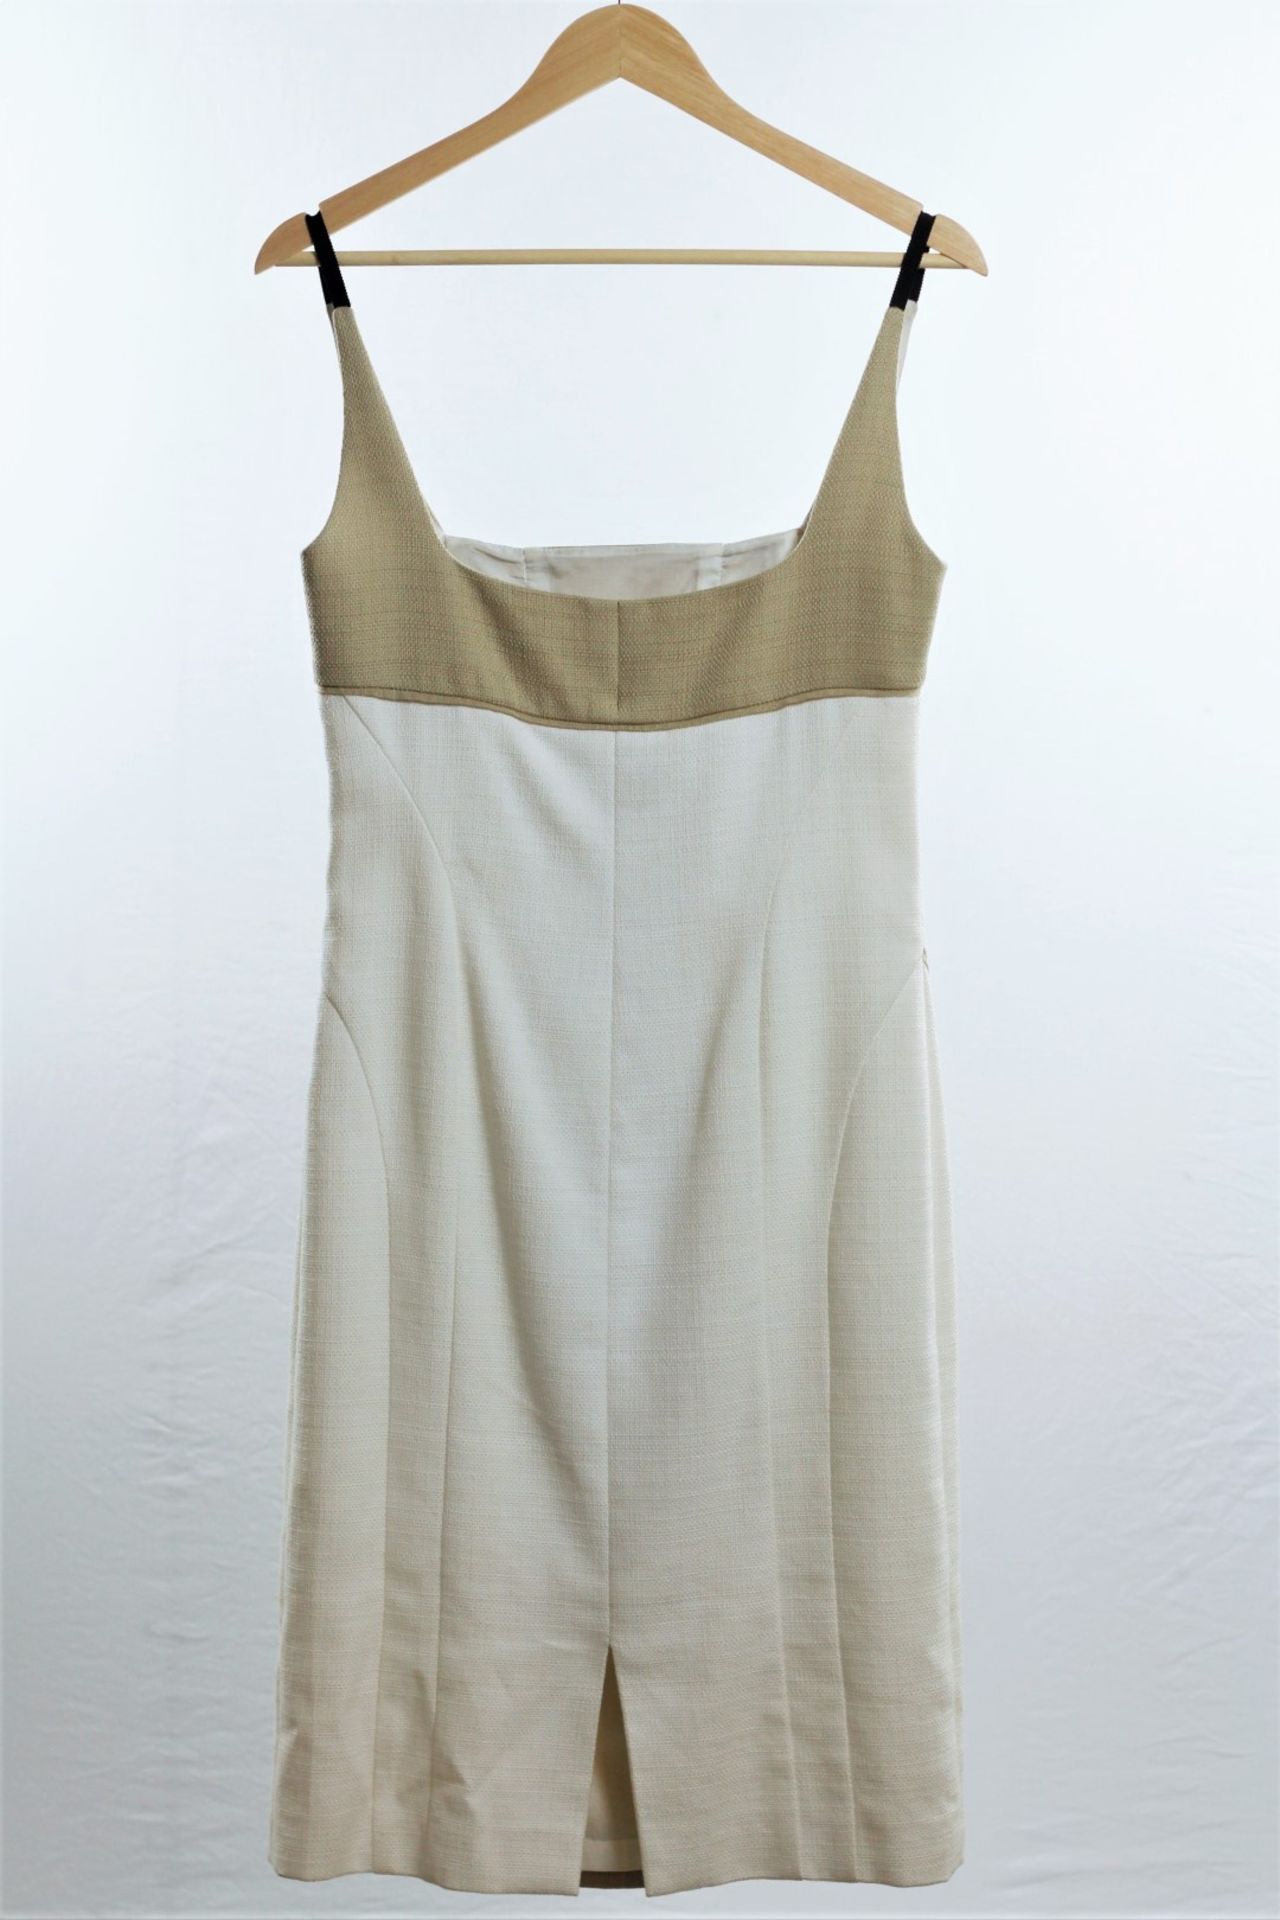 1 x Boutique Le Duc White/Faun Dress - Size: 12 - Material: 100% Cotton - From a High End Clothing - Image 8 of 14